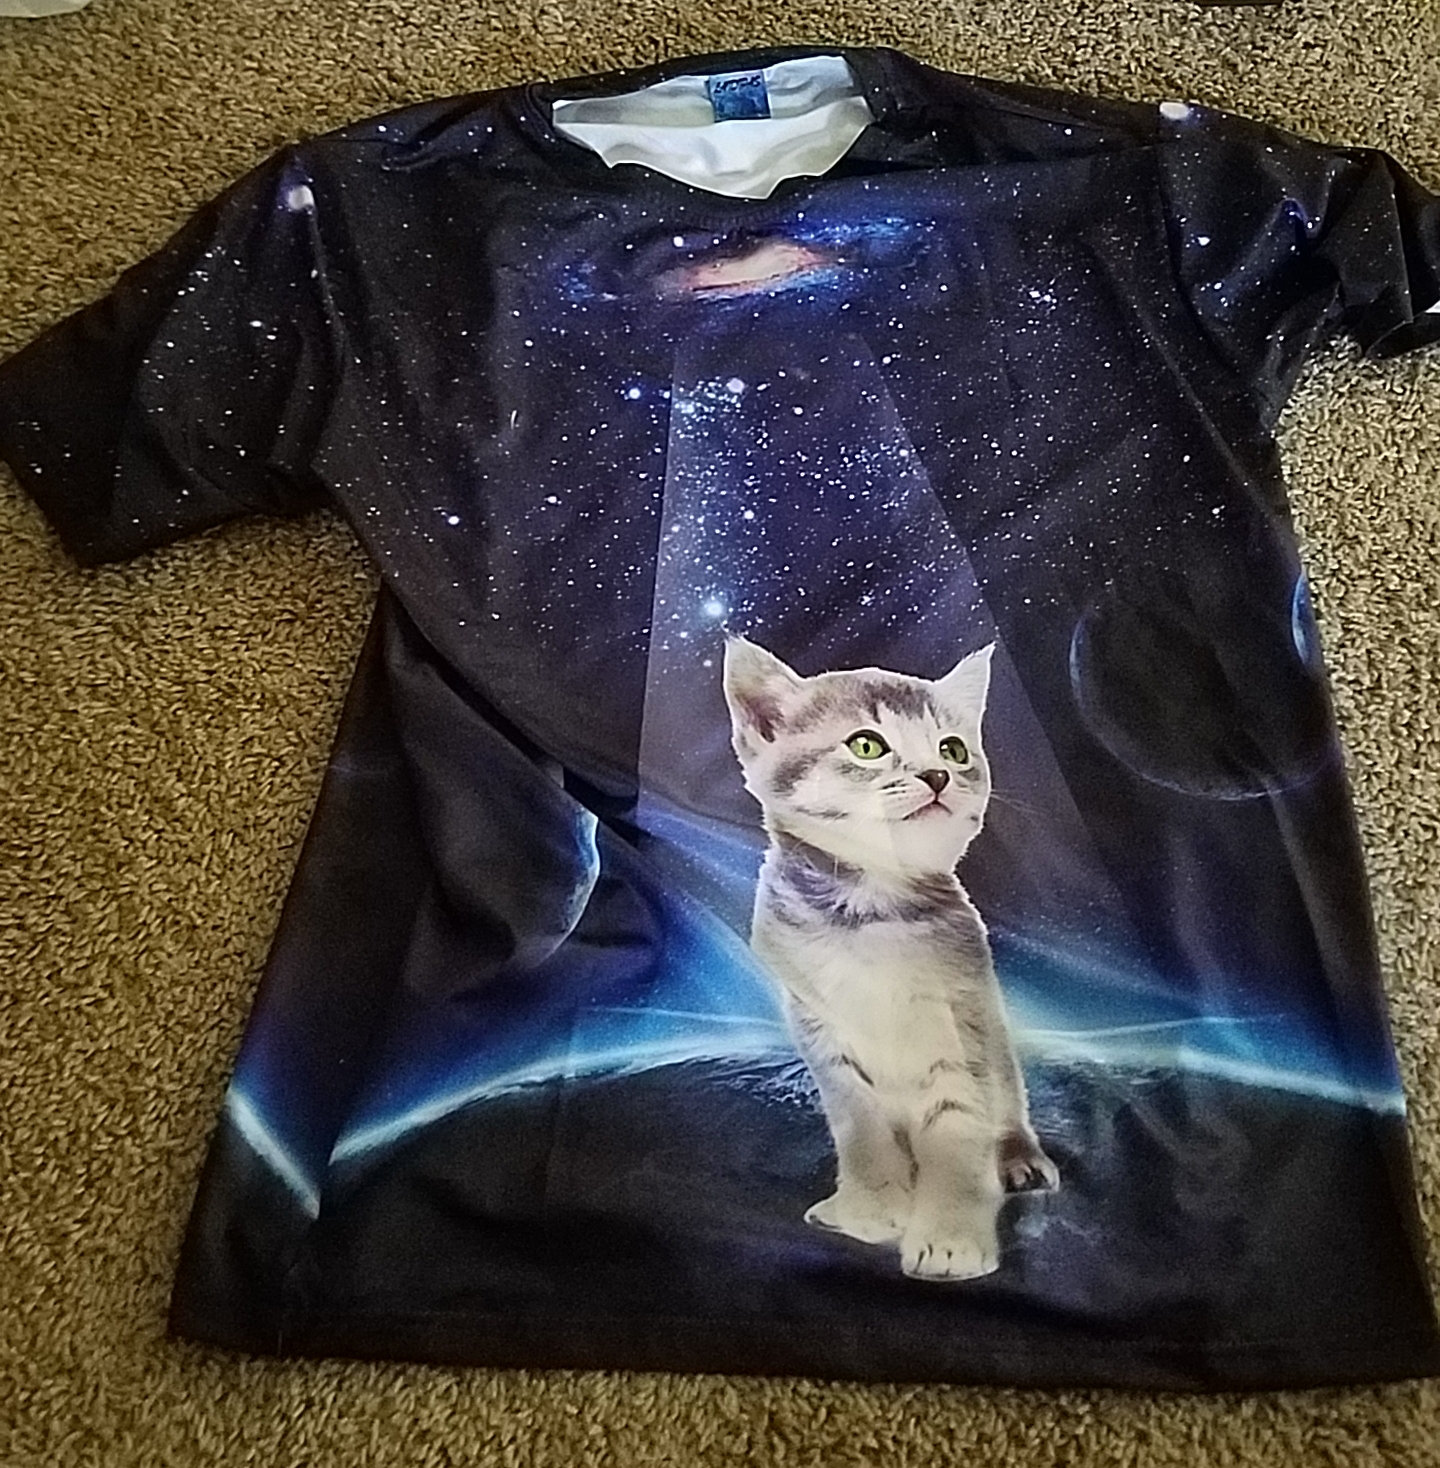 Nice shirt, but received the wrong one.